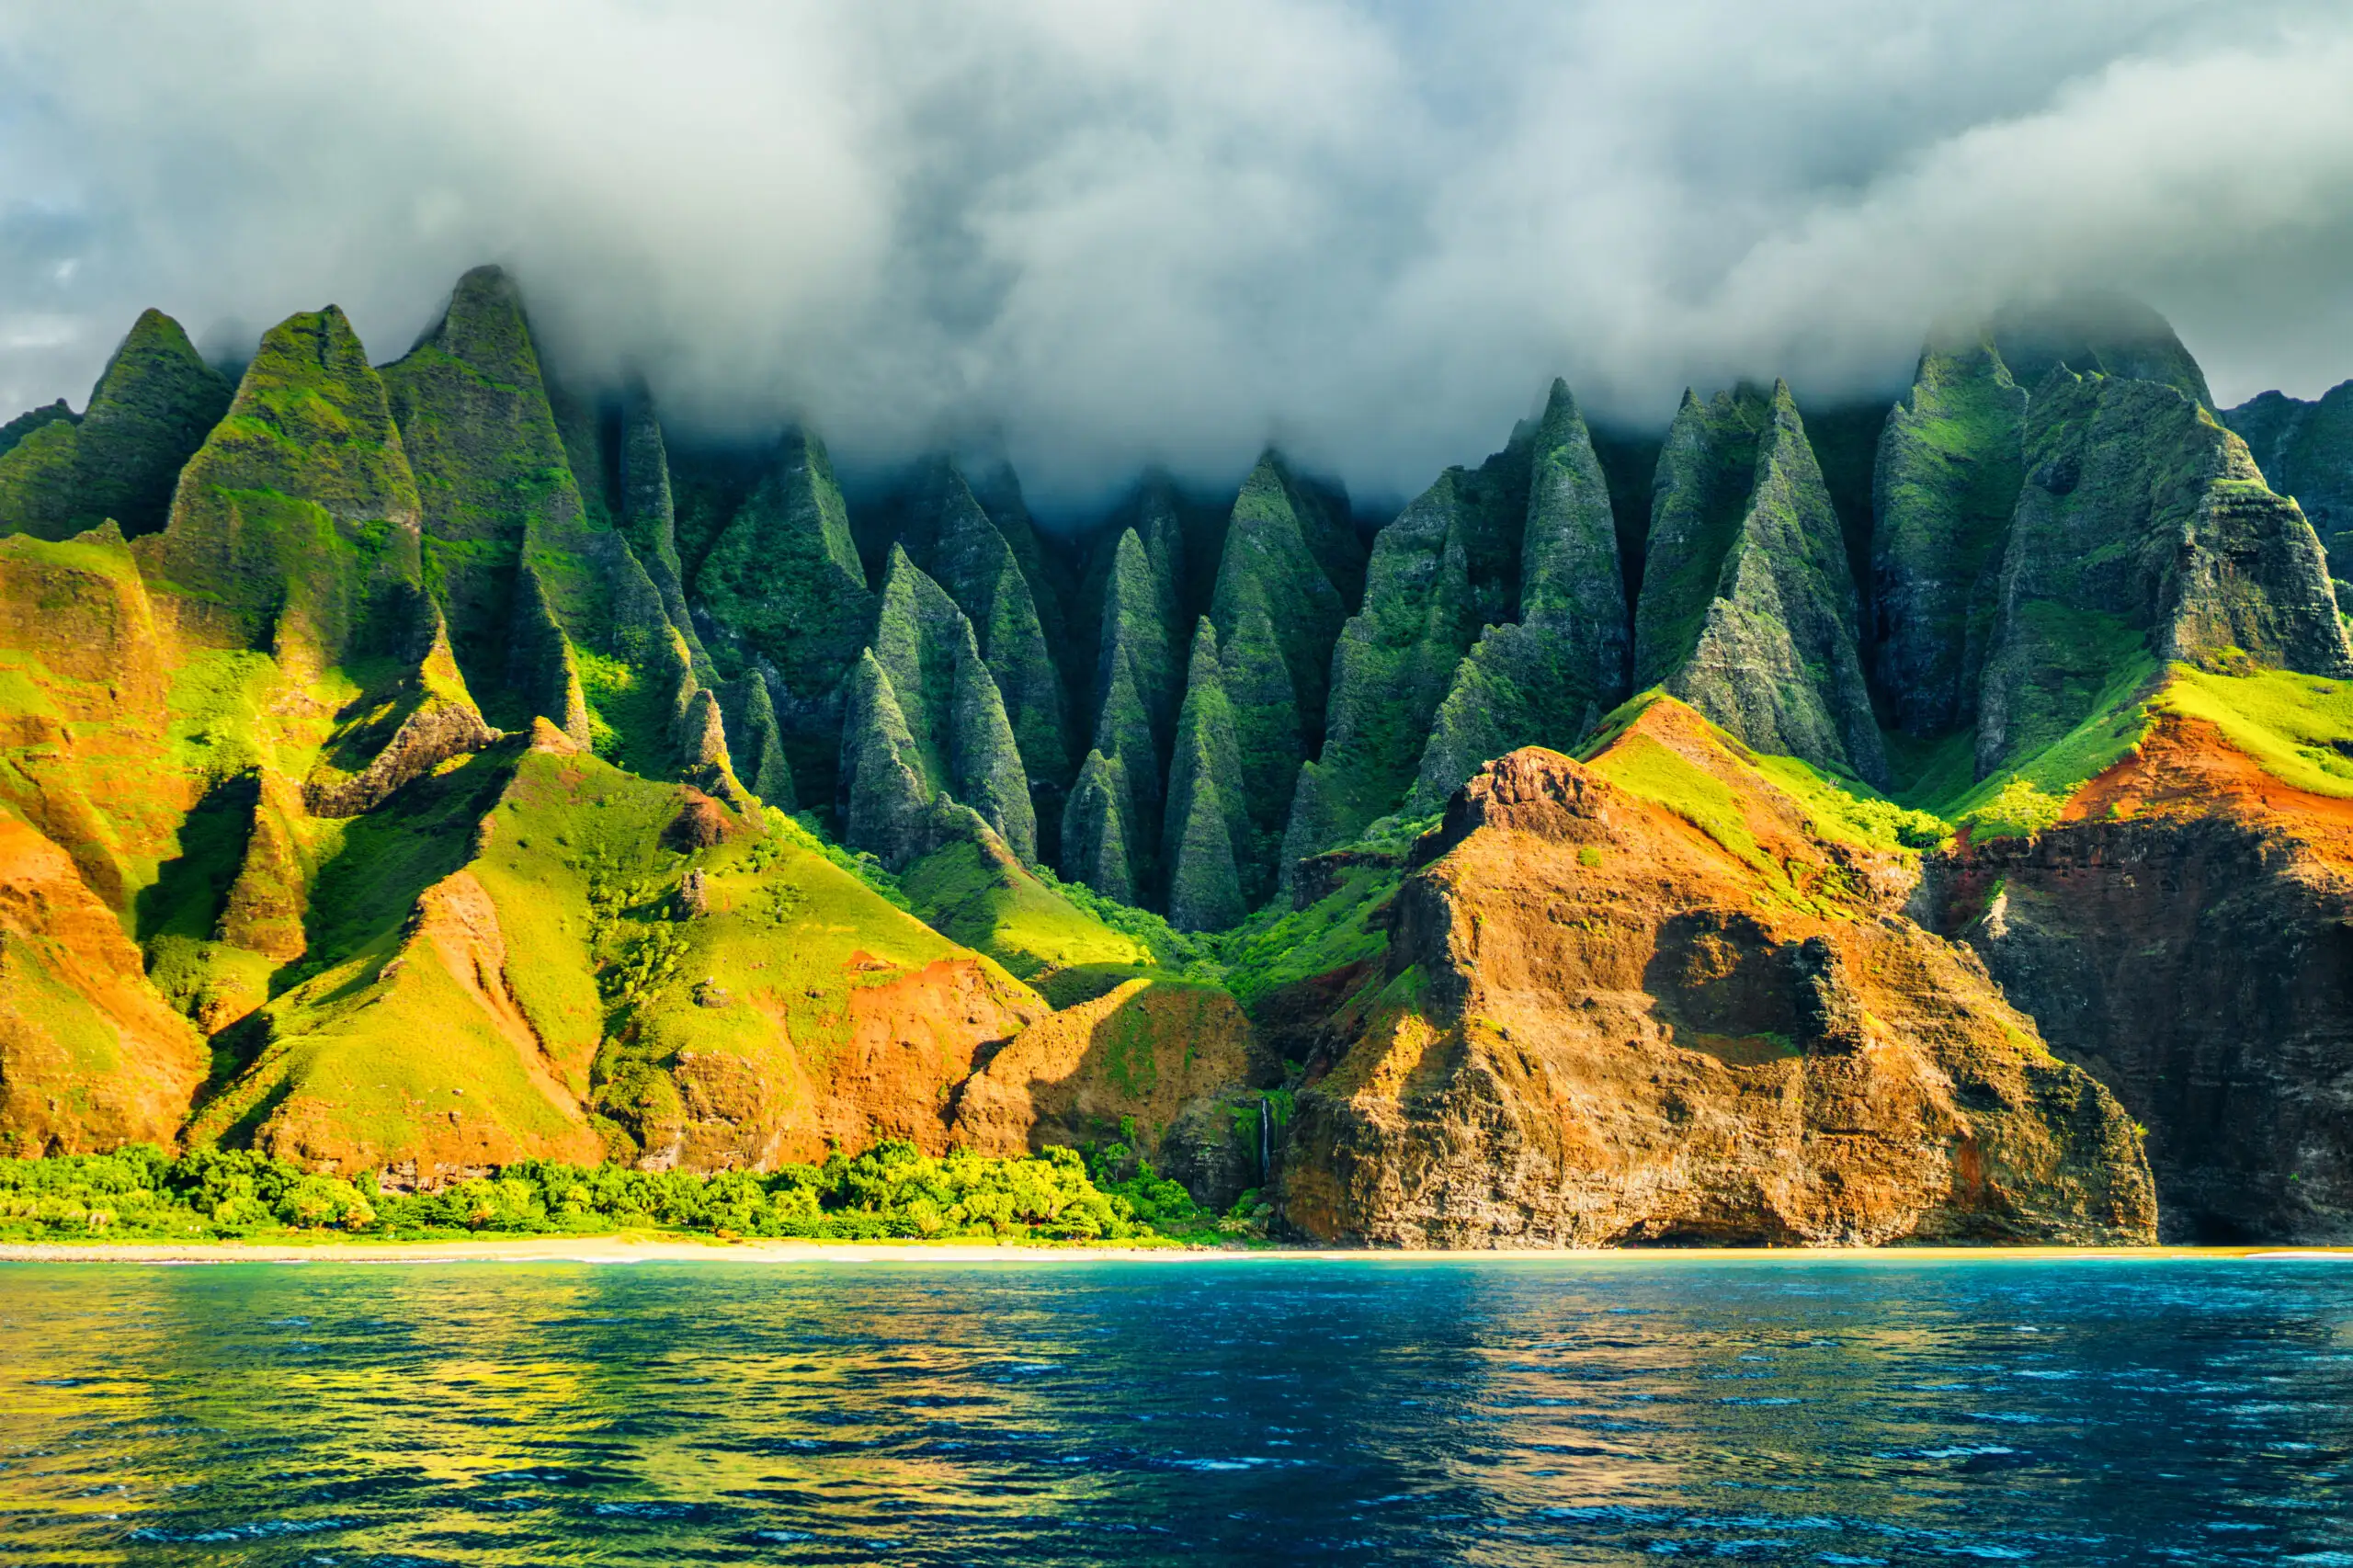 do you need a passport to visit hawaii